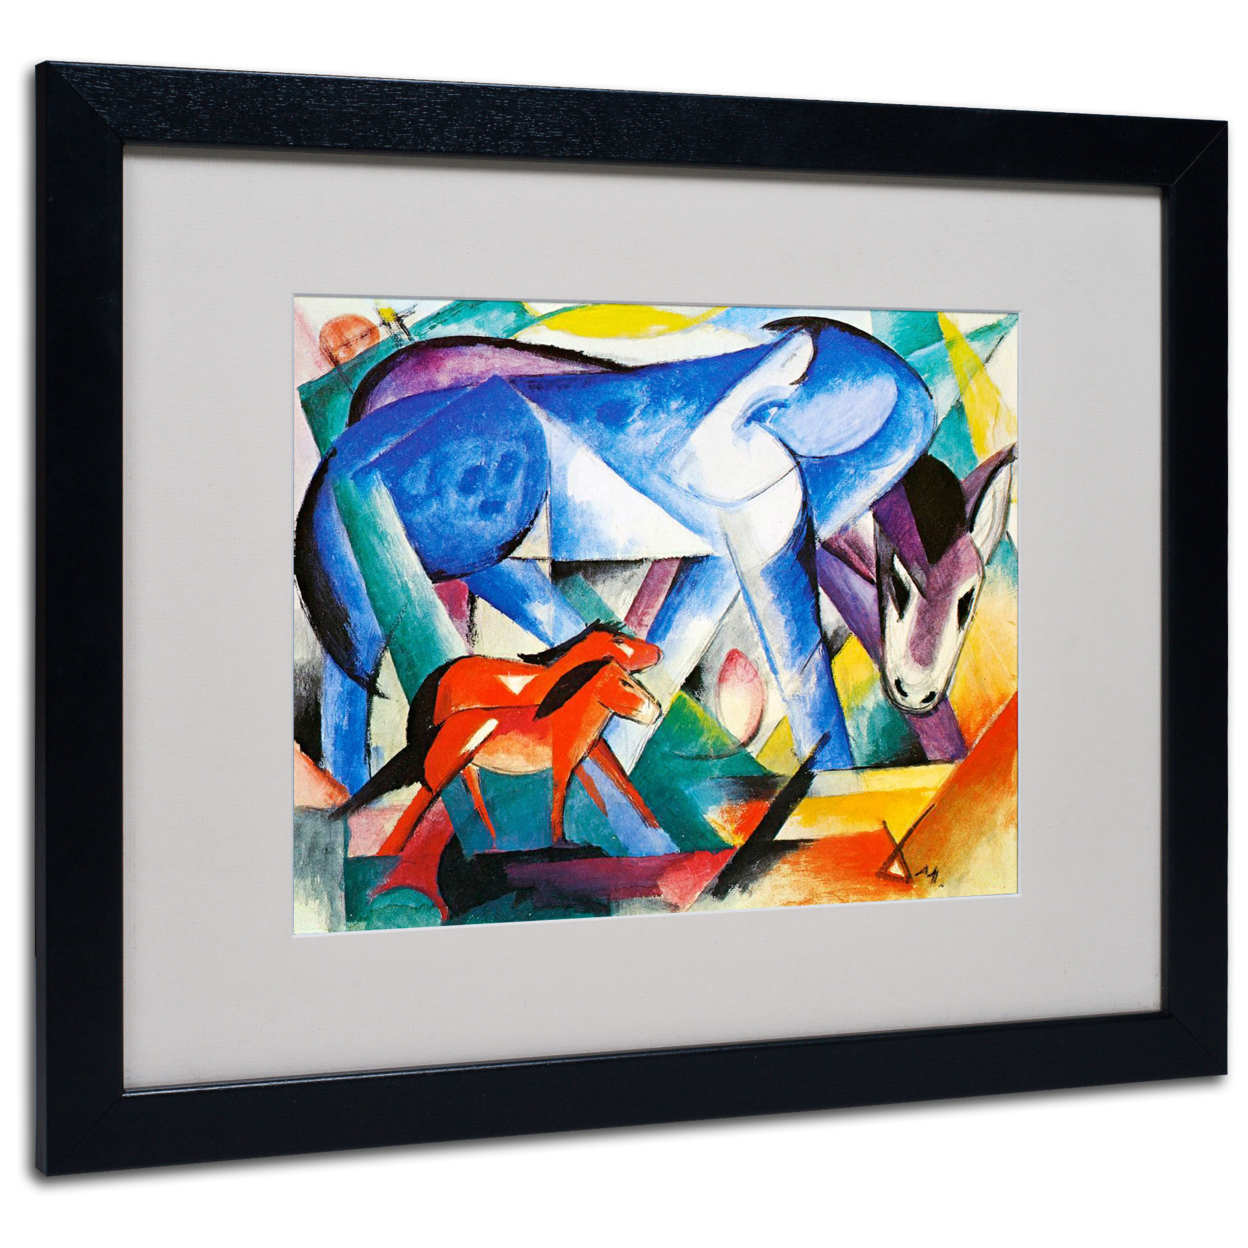 Franz Marc 'The First Animals 1913' Black Wooden Framed Art 18 X 22 Inches